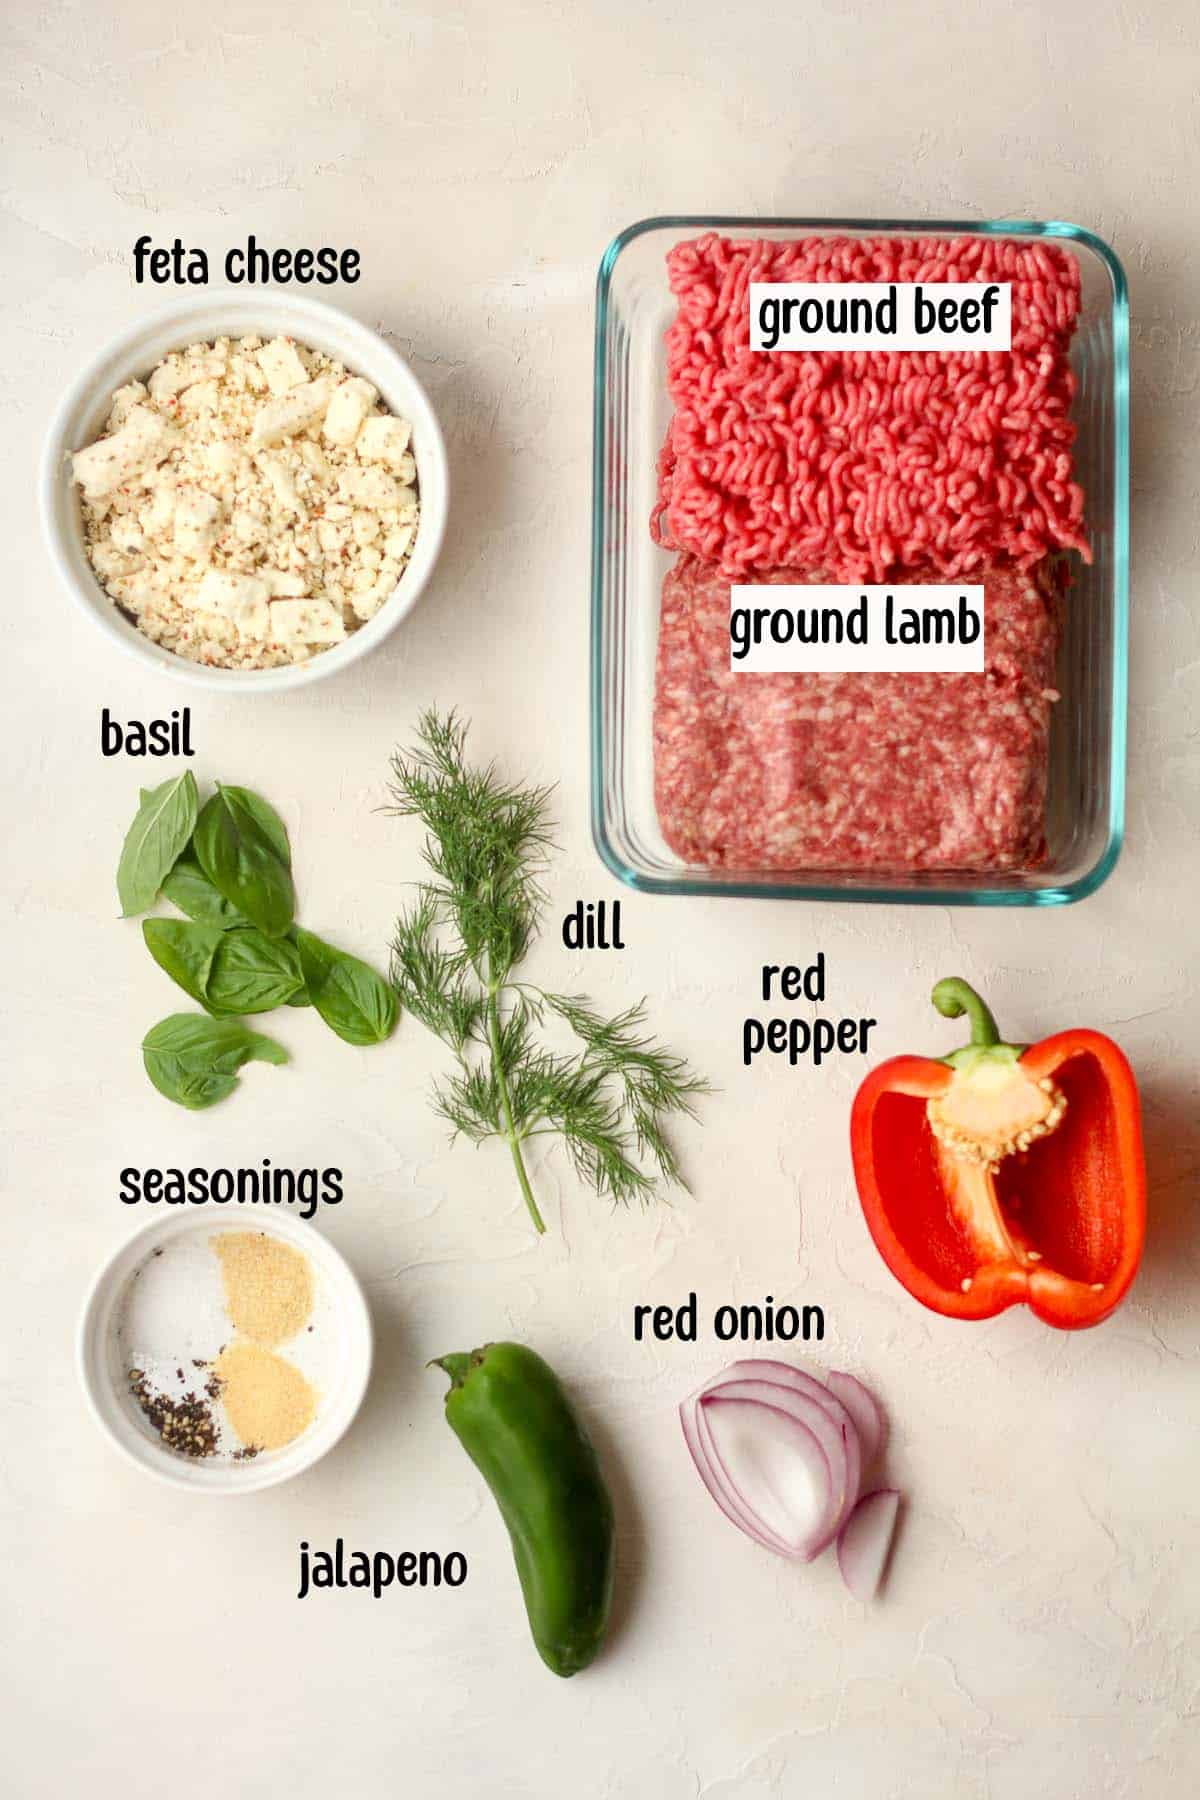 The labeled ingredients for the lamb feta burgers.